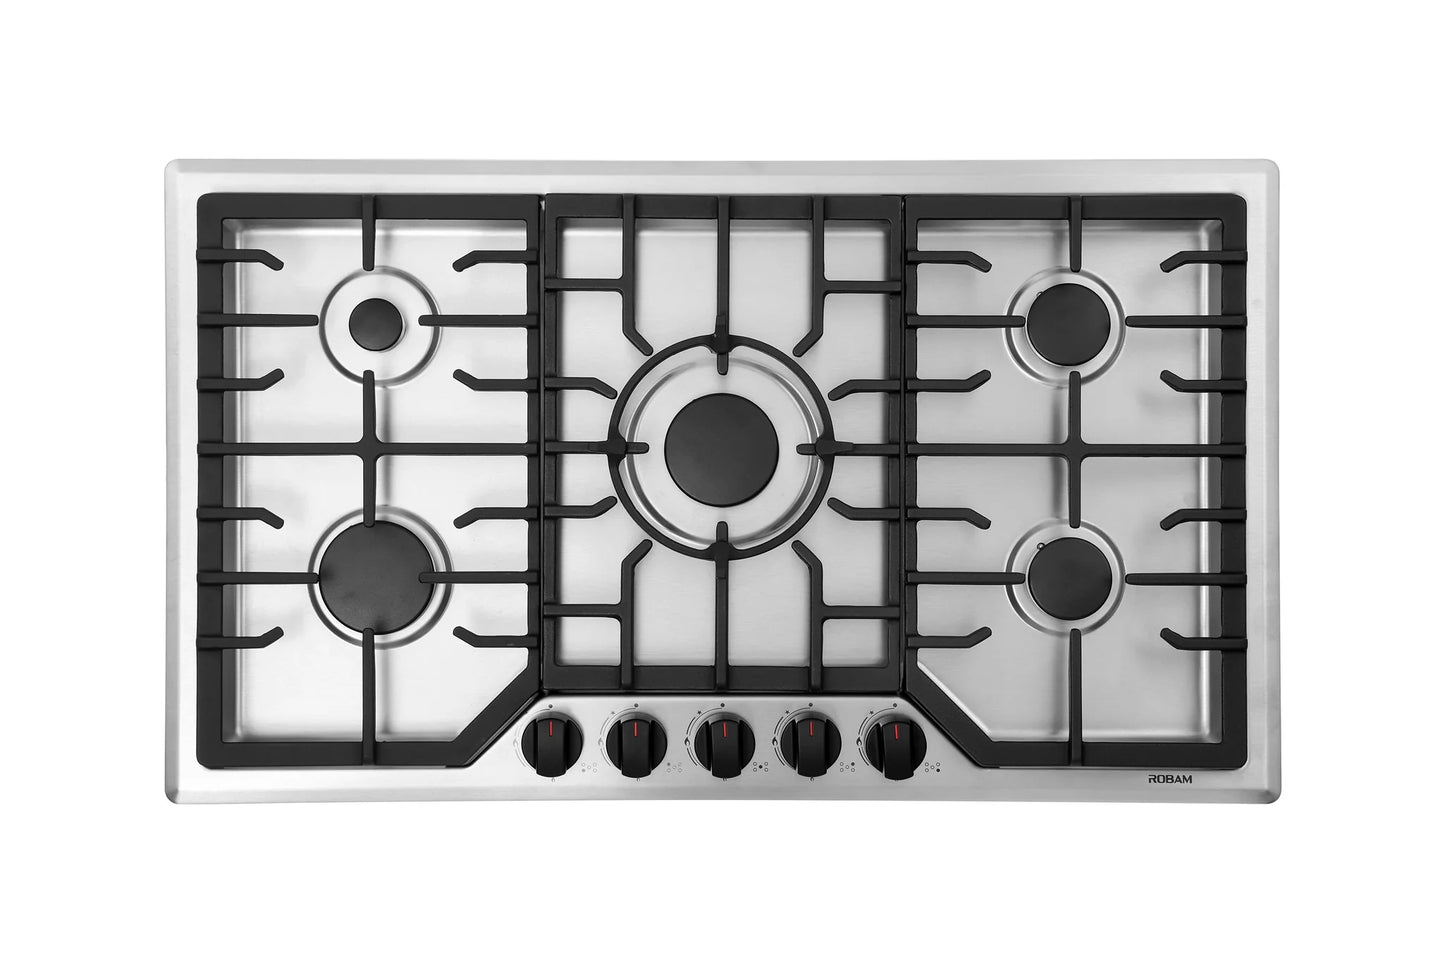 ROBAM Cooktop 7G9H50- 36" Drop-in (5 Burners)